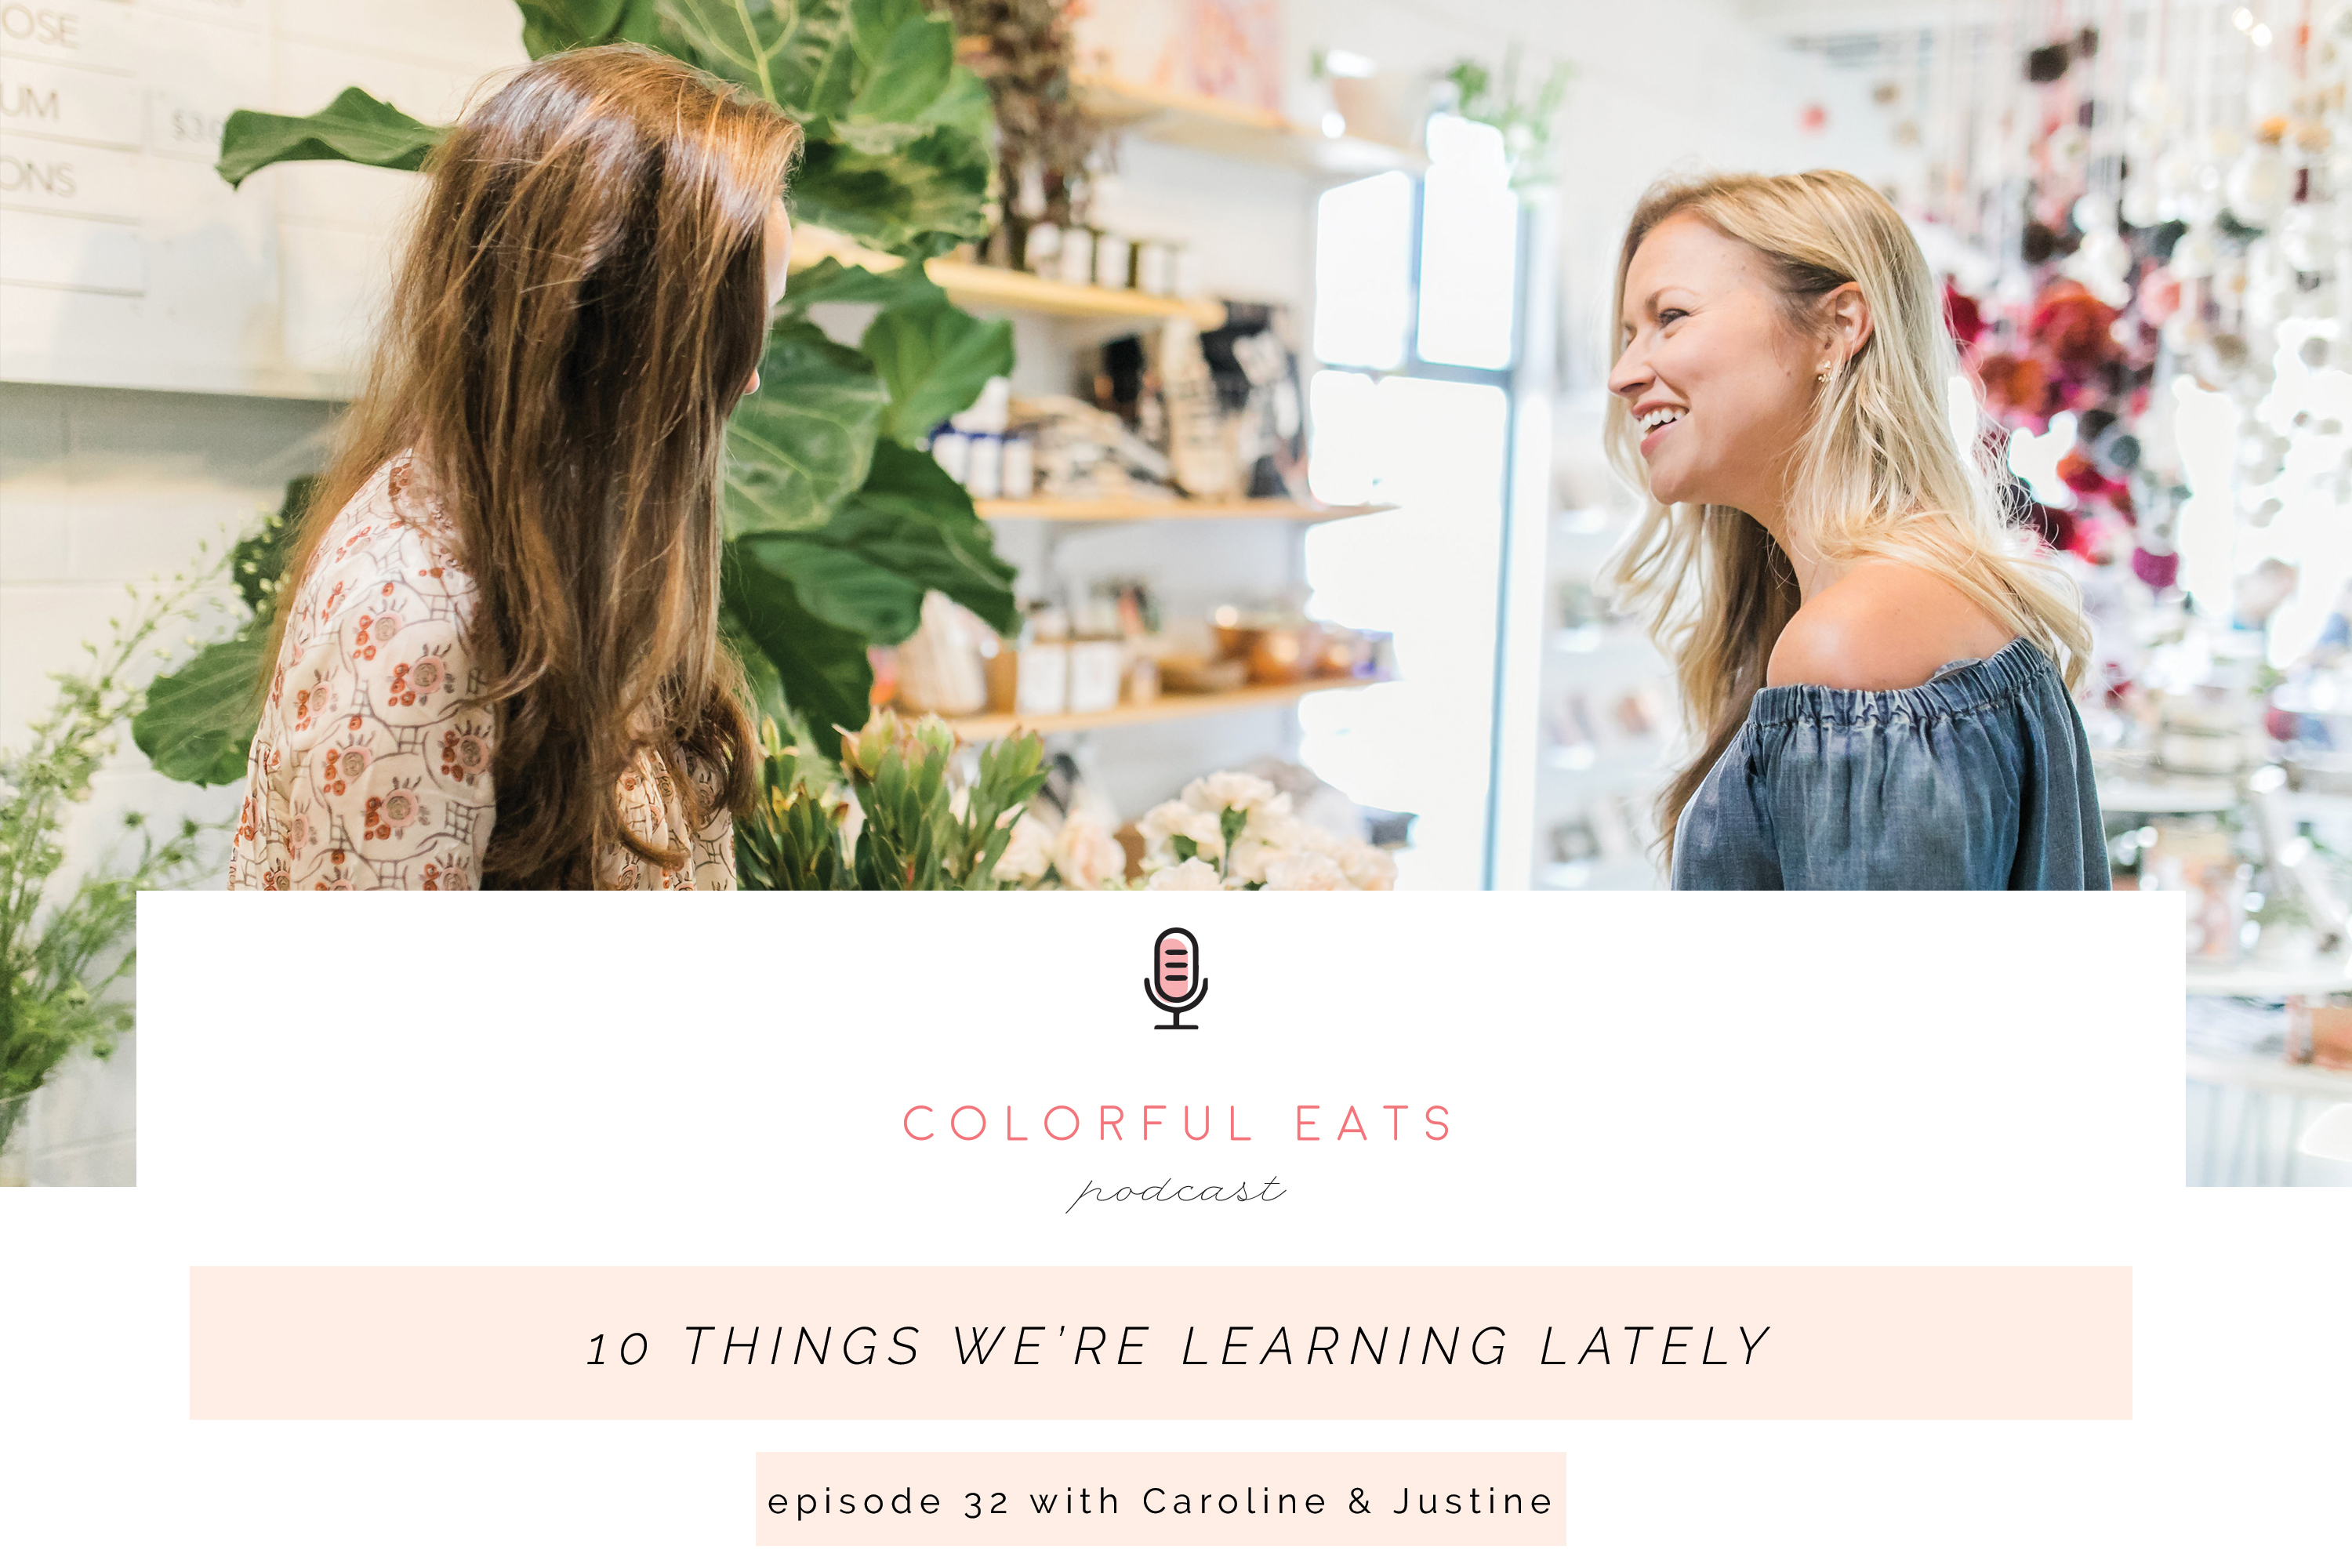 Colorful Eats Podcast Episode 32 Learning Lately